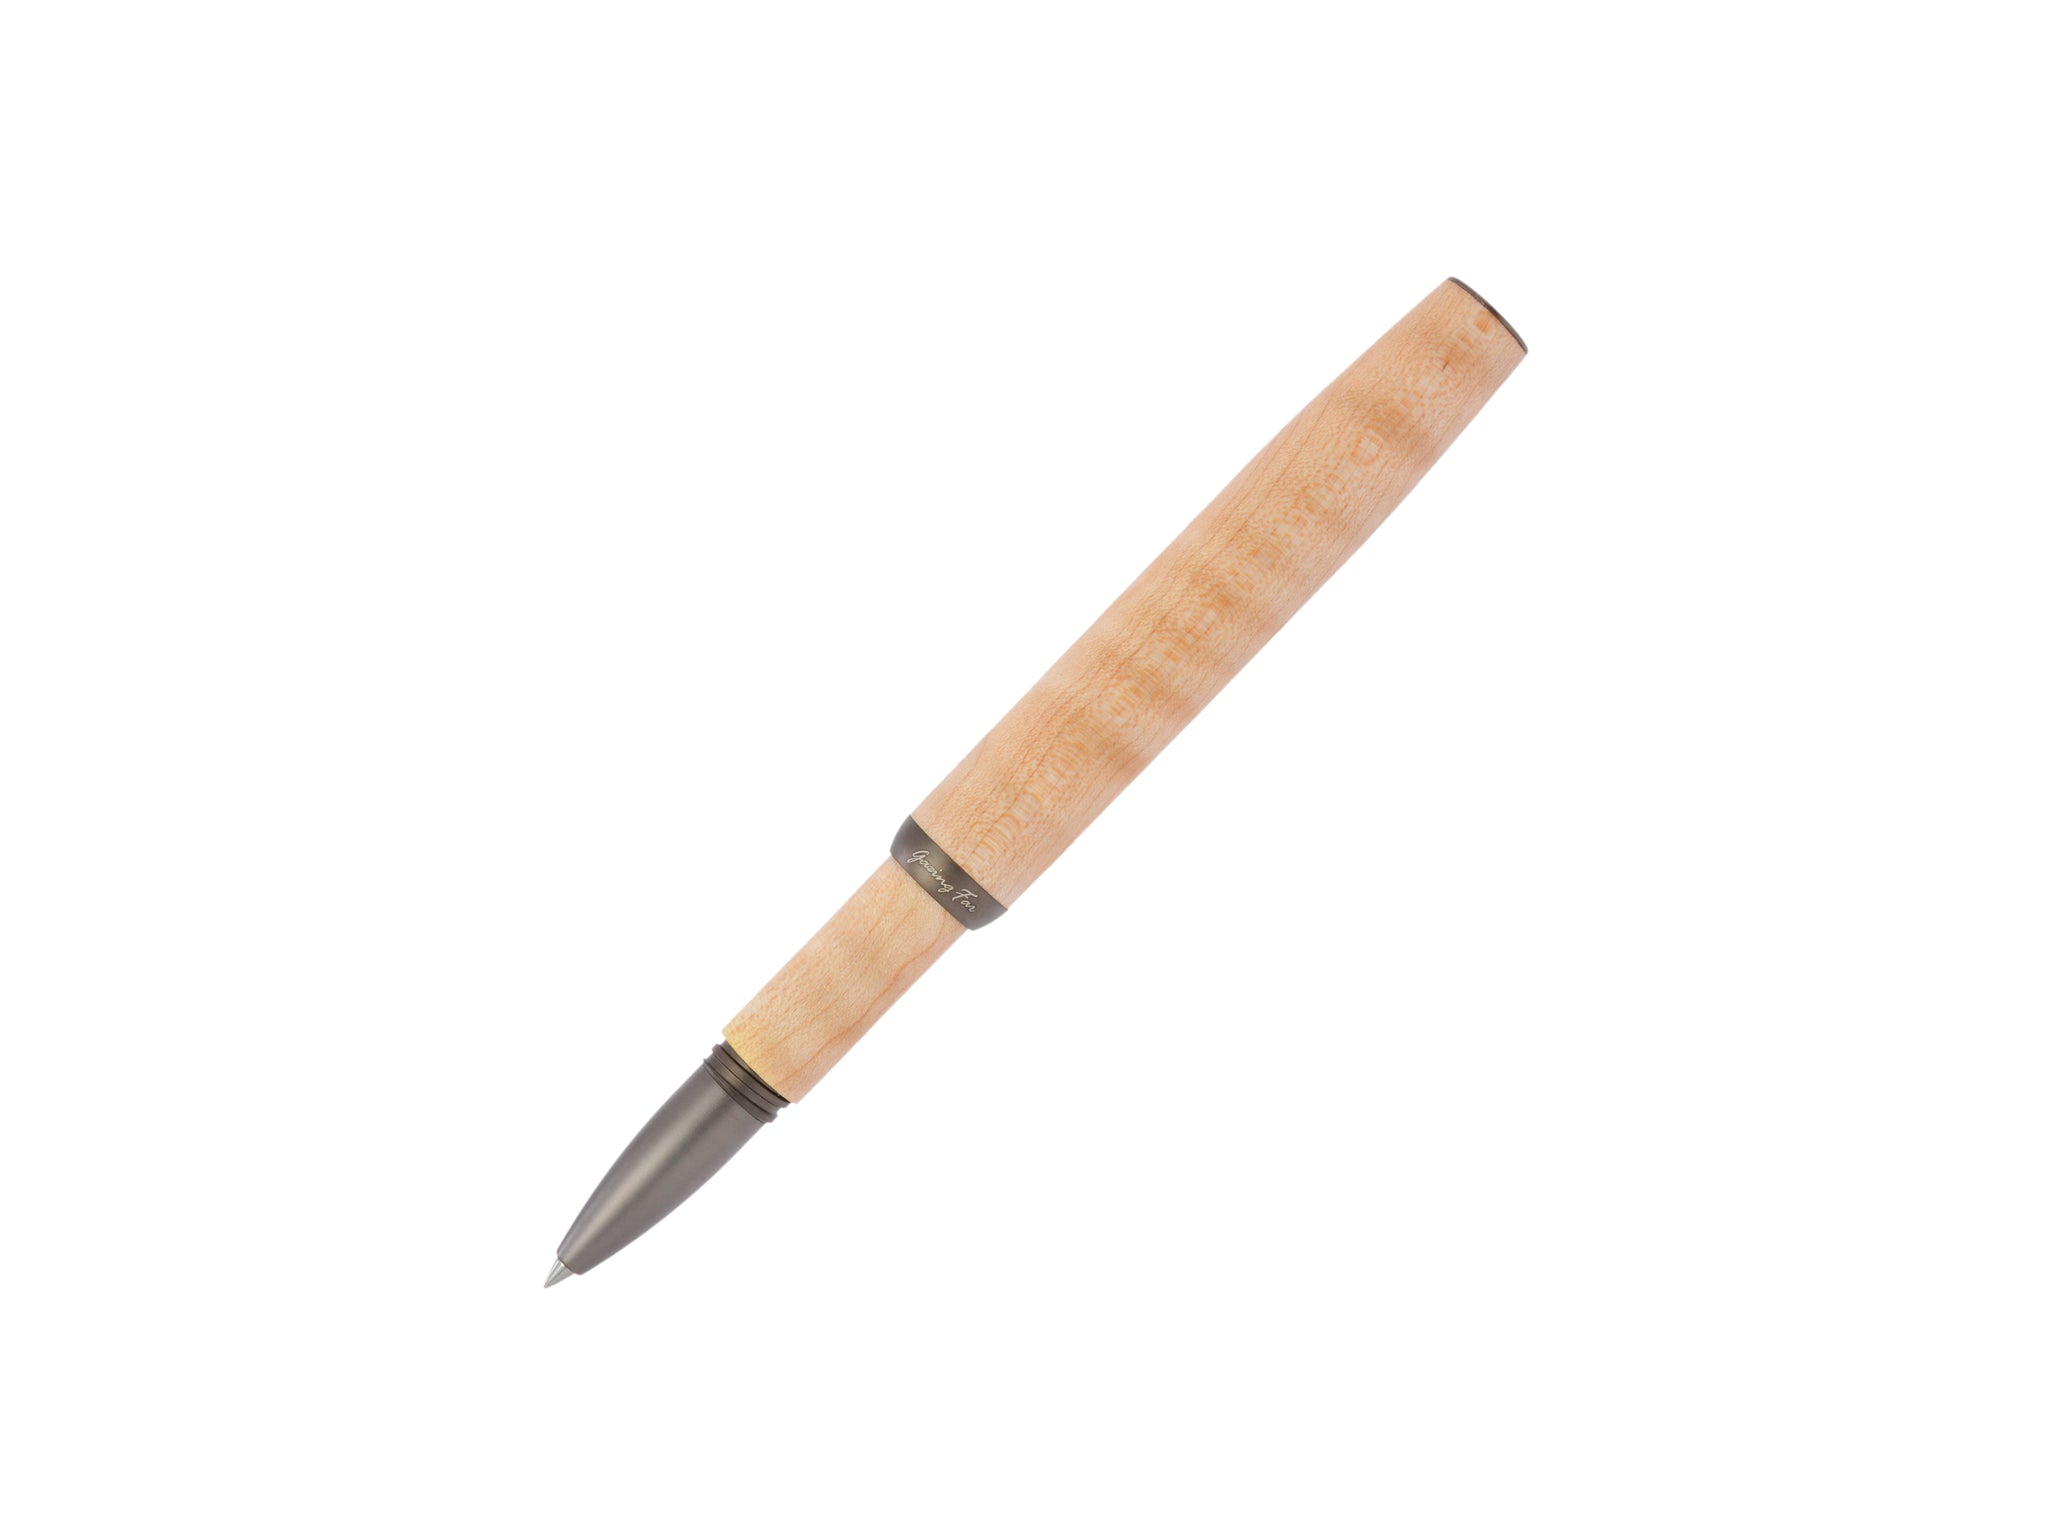 tmX , the most tiny wooden fountain pen from Gazing Far.